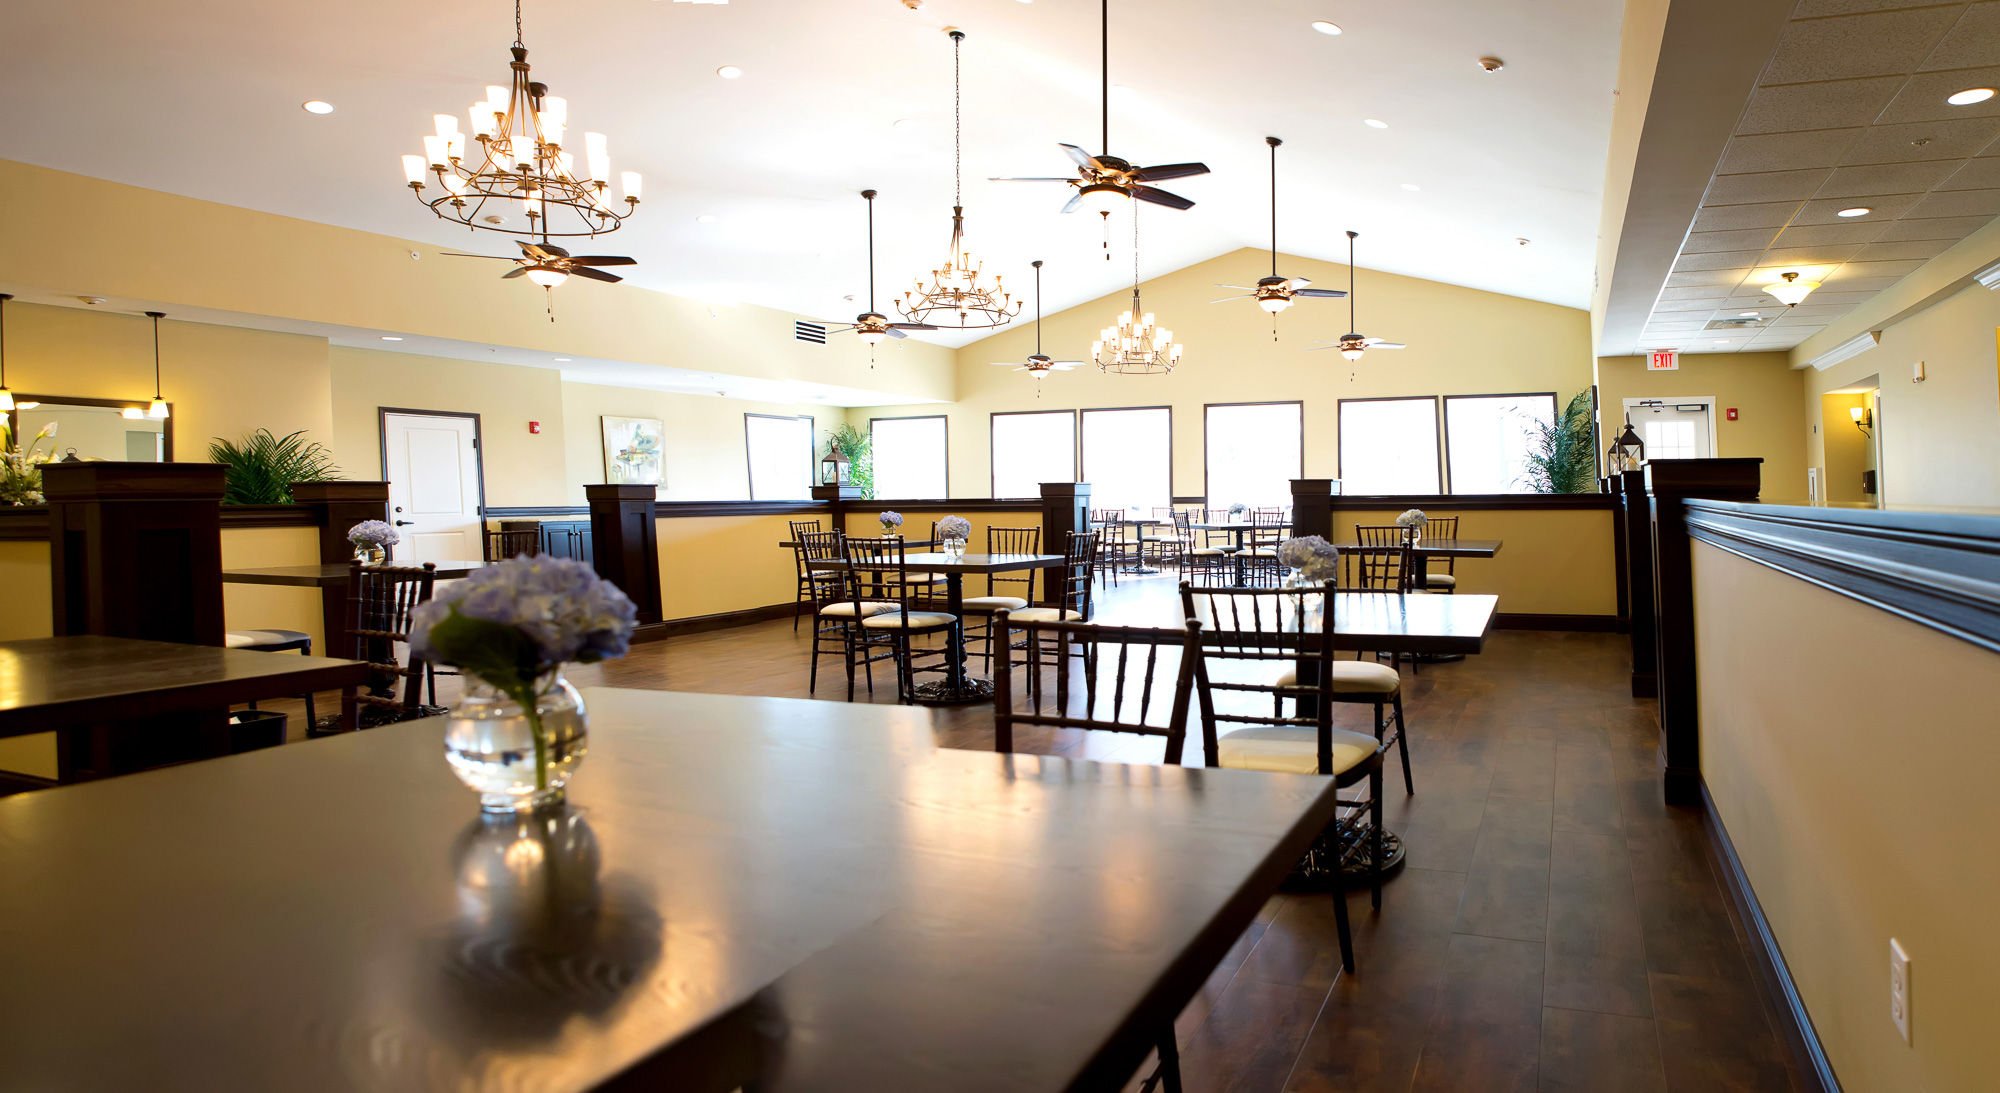 Assisted Living restaurant-style dining